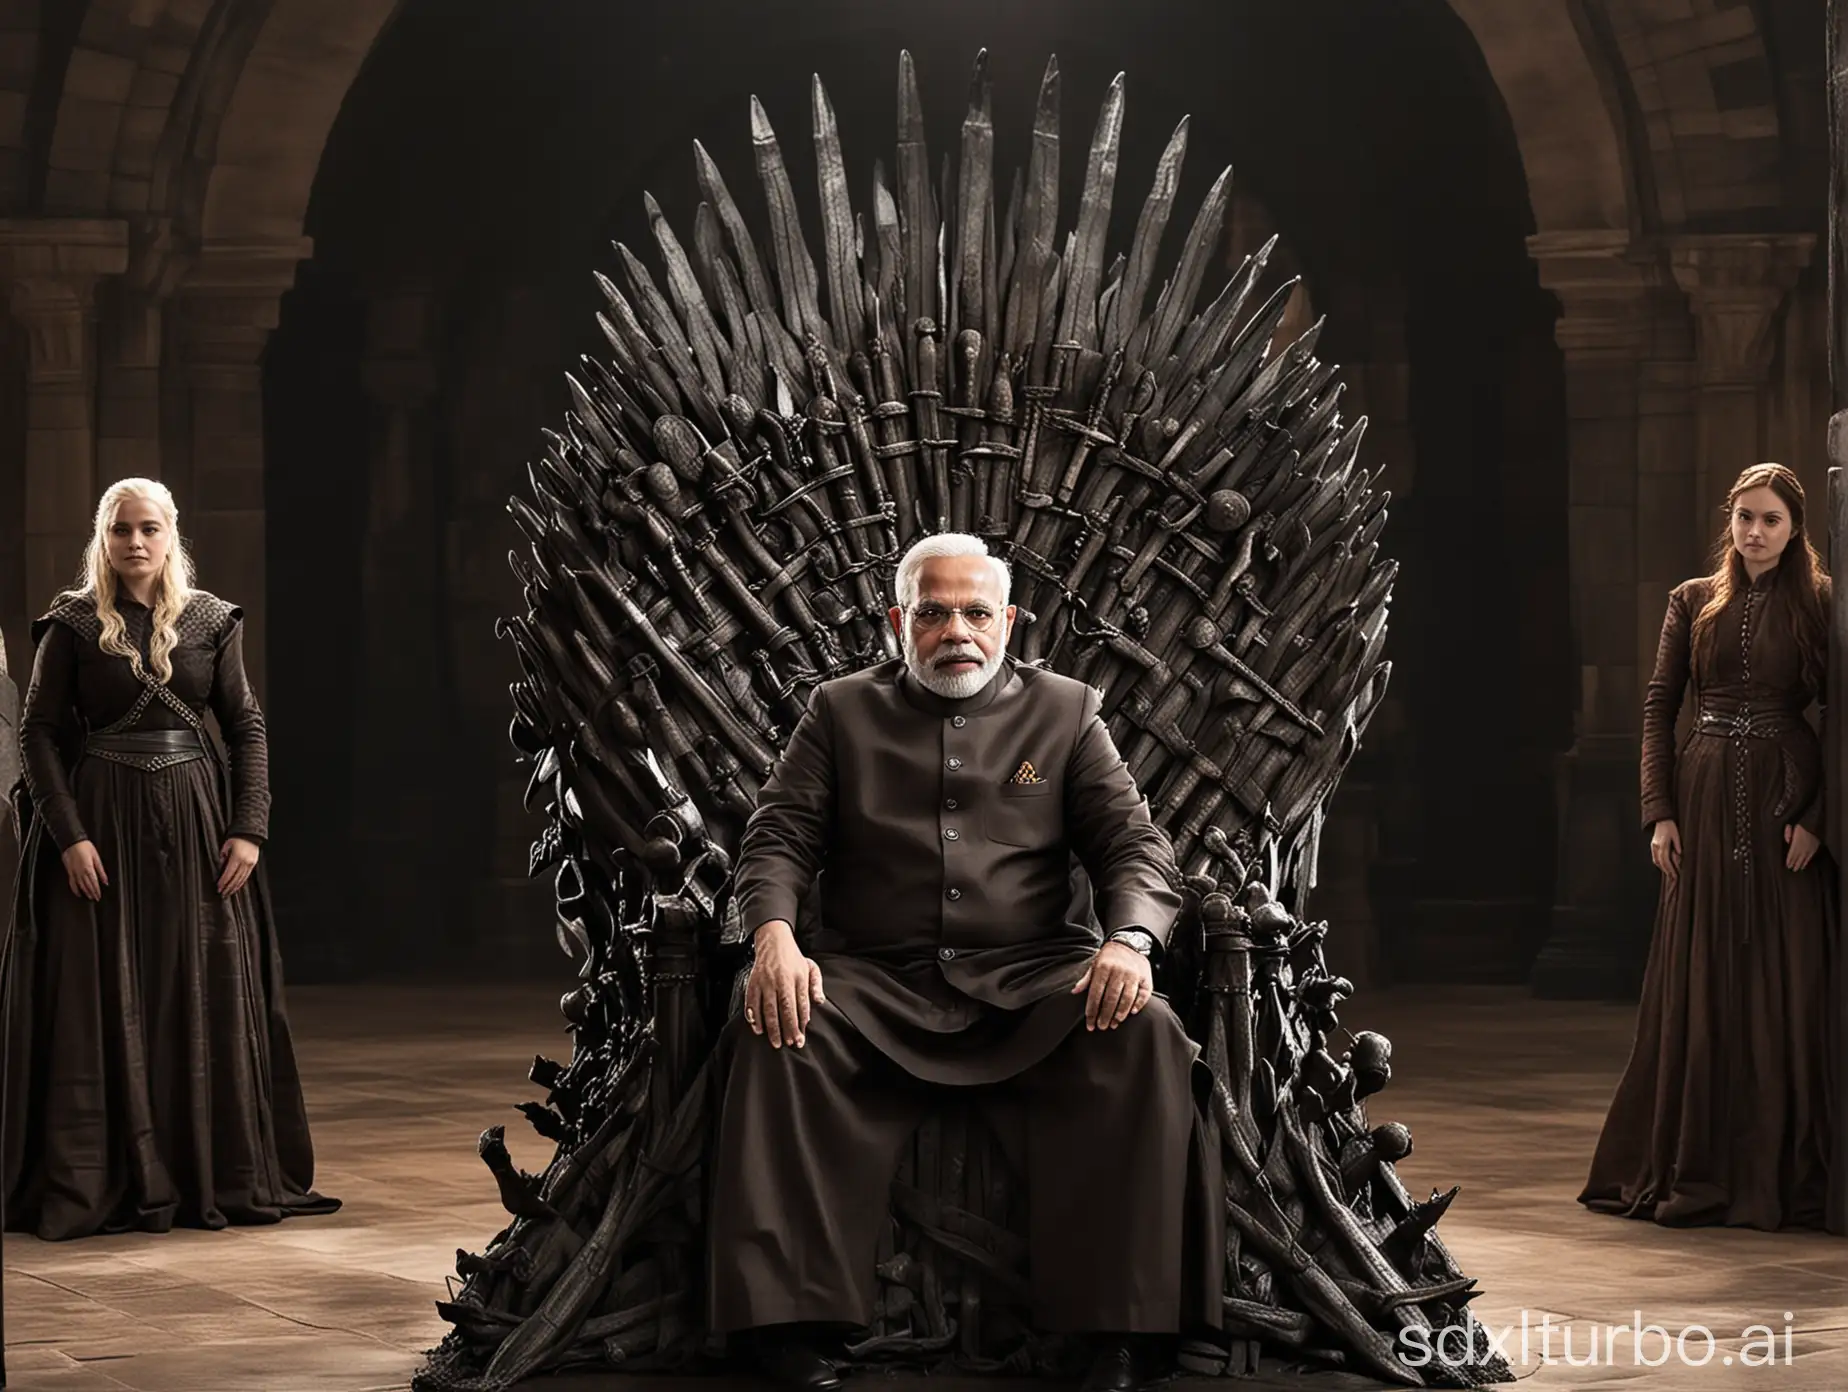 Narendra Modi seated on the iron throne in game of thrones